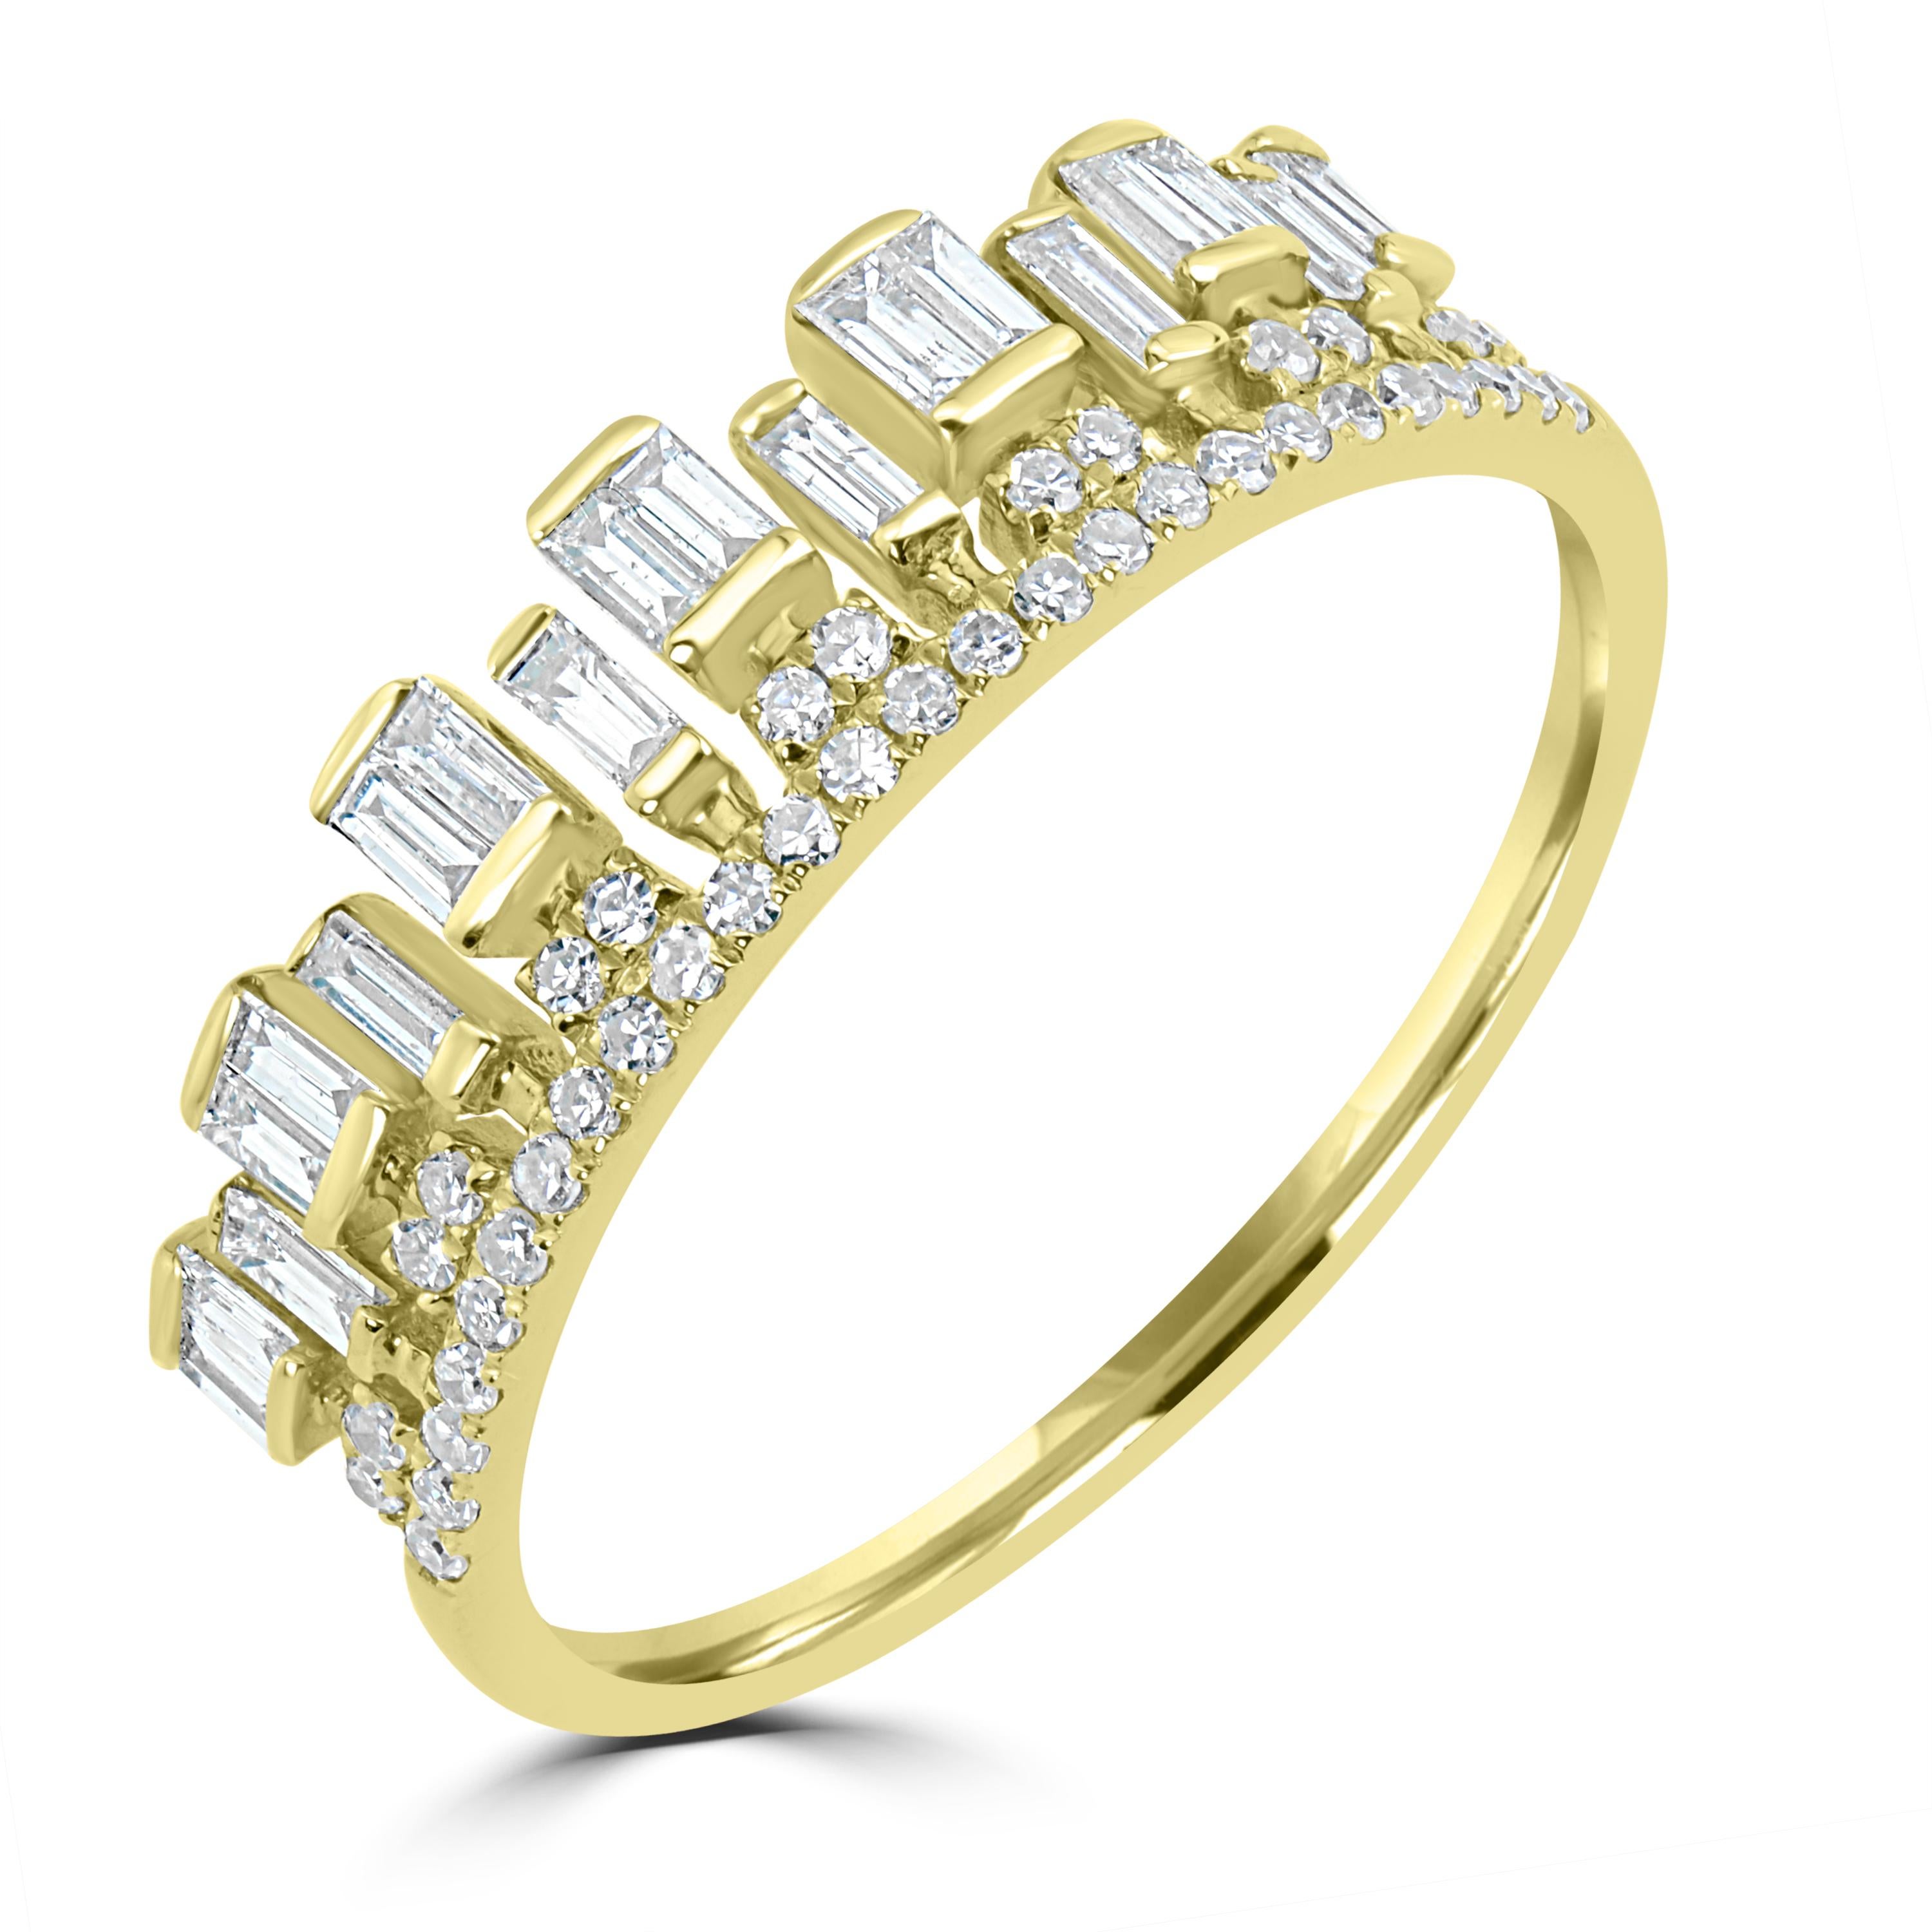 This Luxle beautiful and bold ring contains artfully embellished baguettes glimmering from a row of pave set round diamonds that bestow an upscale look in 14K yellow gold.

Please follow the Luxury Jewels storefront to view the latest collections &